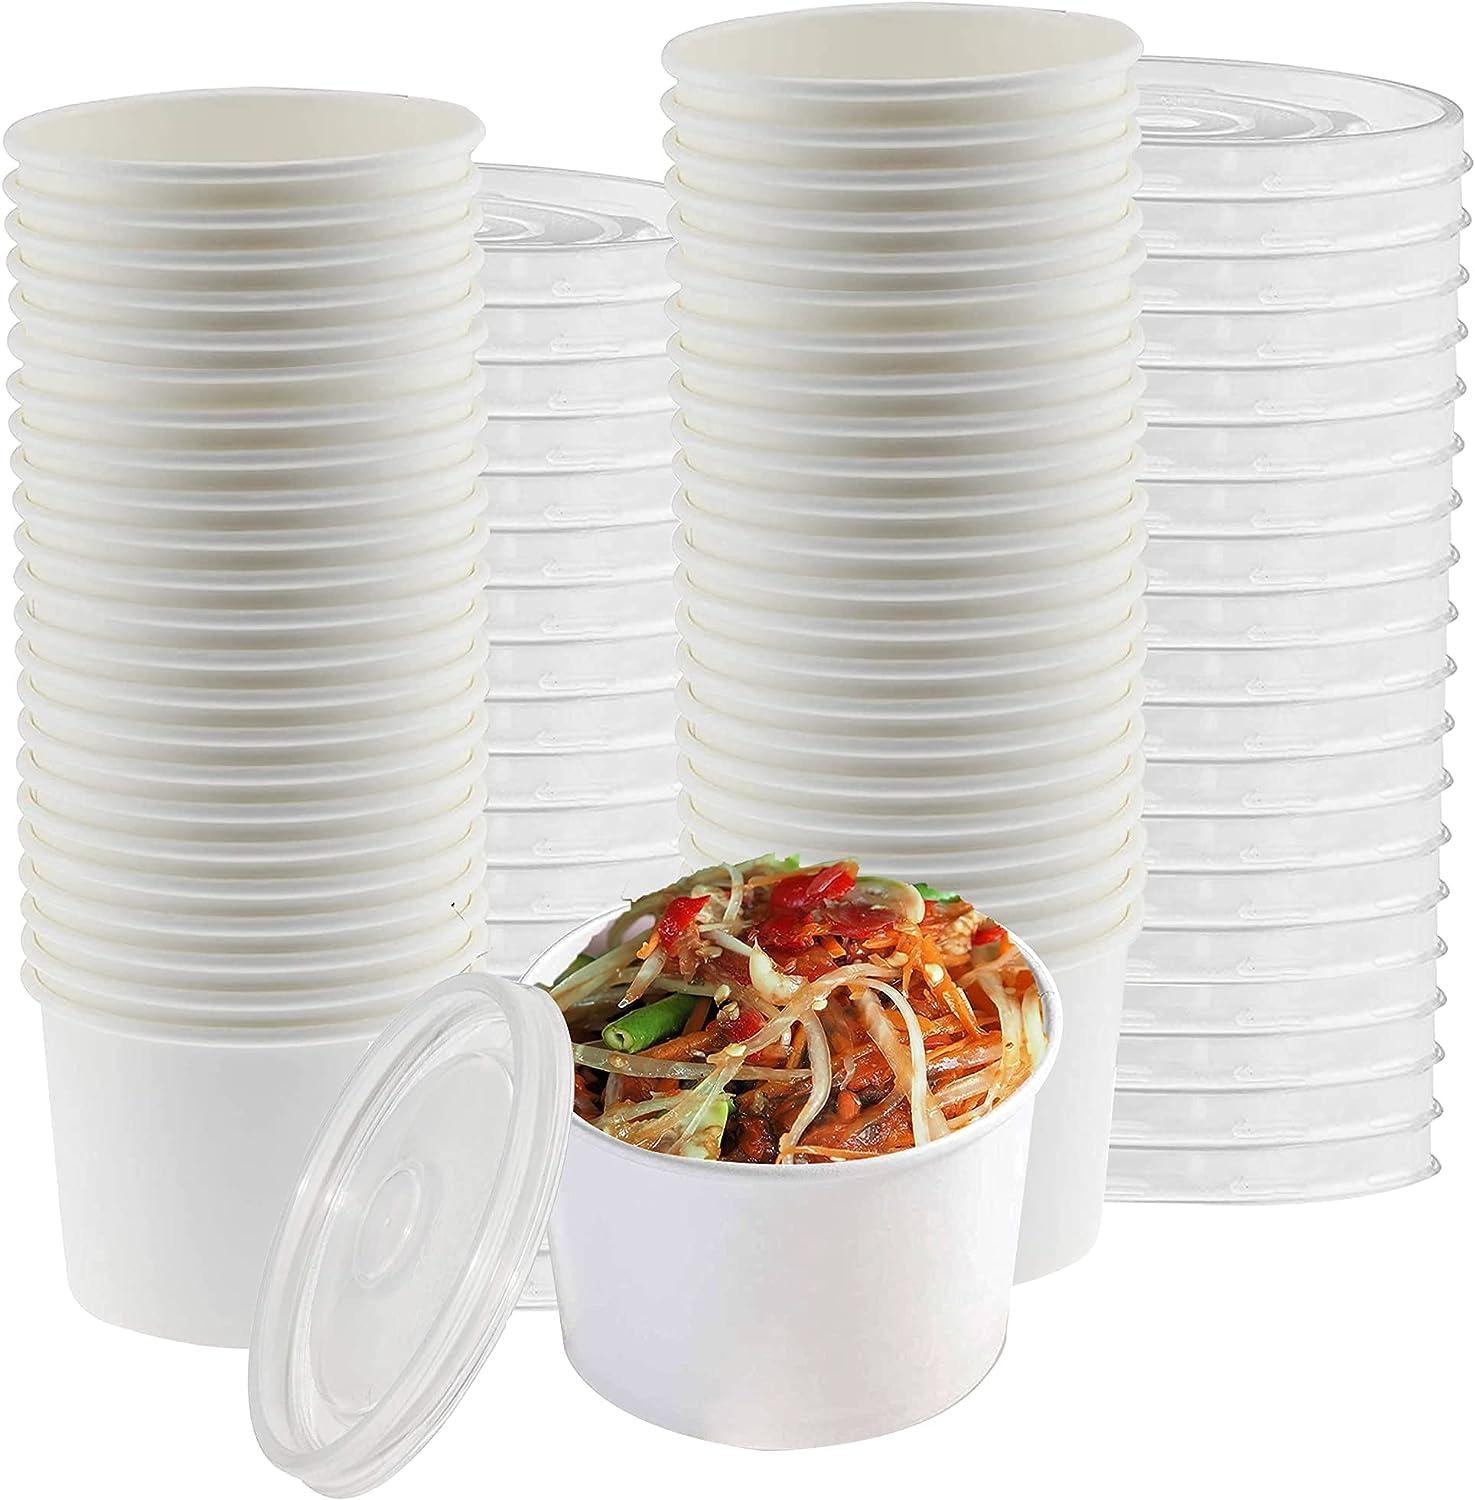 Smygoods 16oz Paper Soup Containers With Lids, Disposable Soup